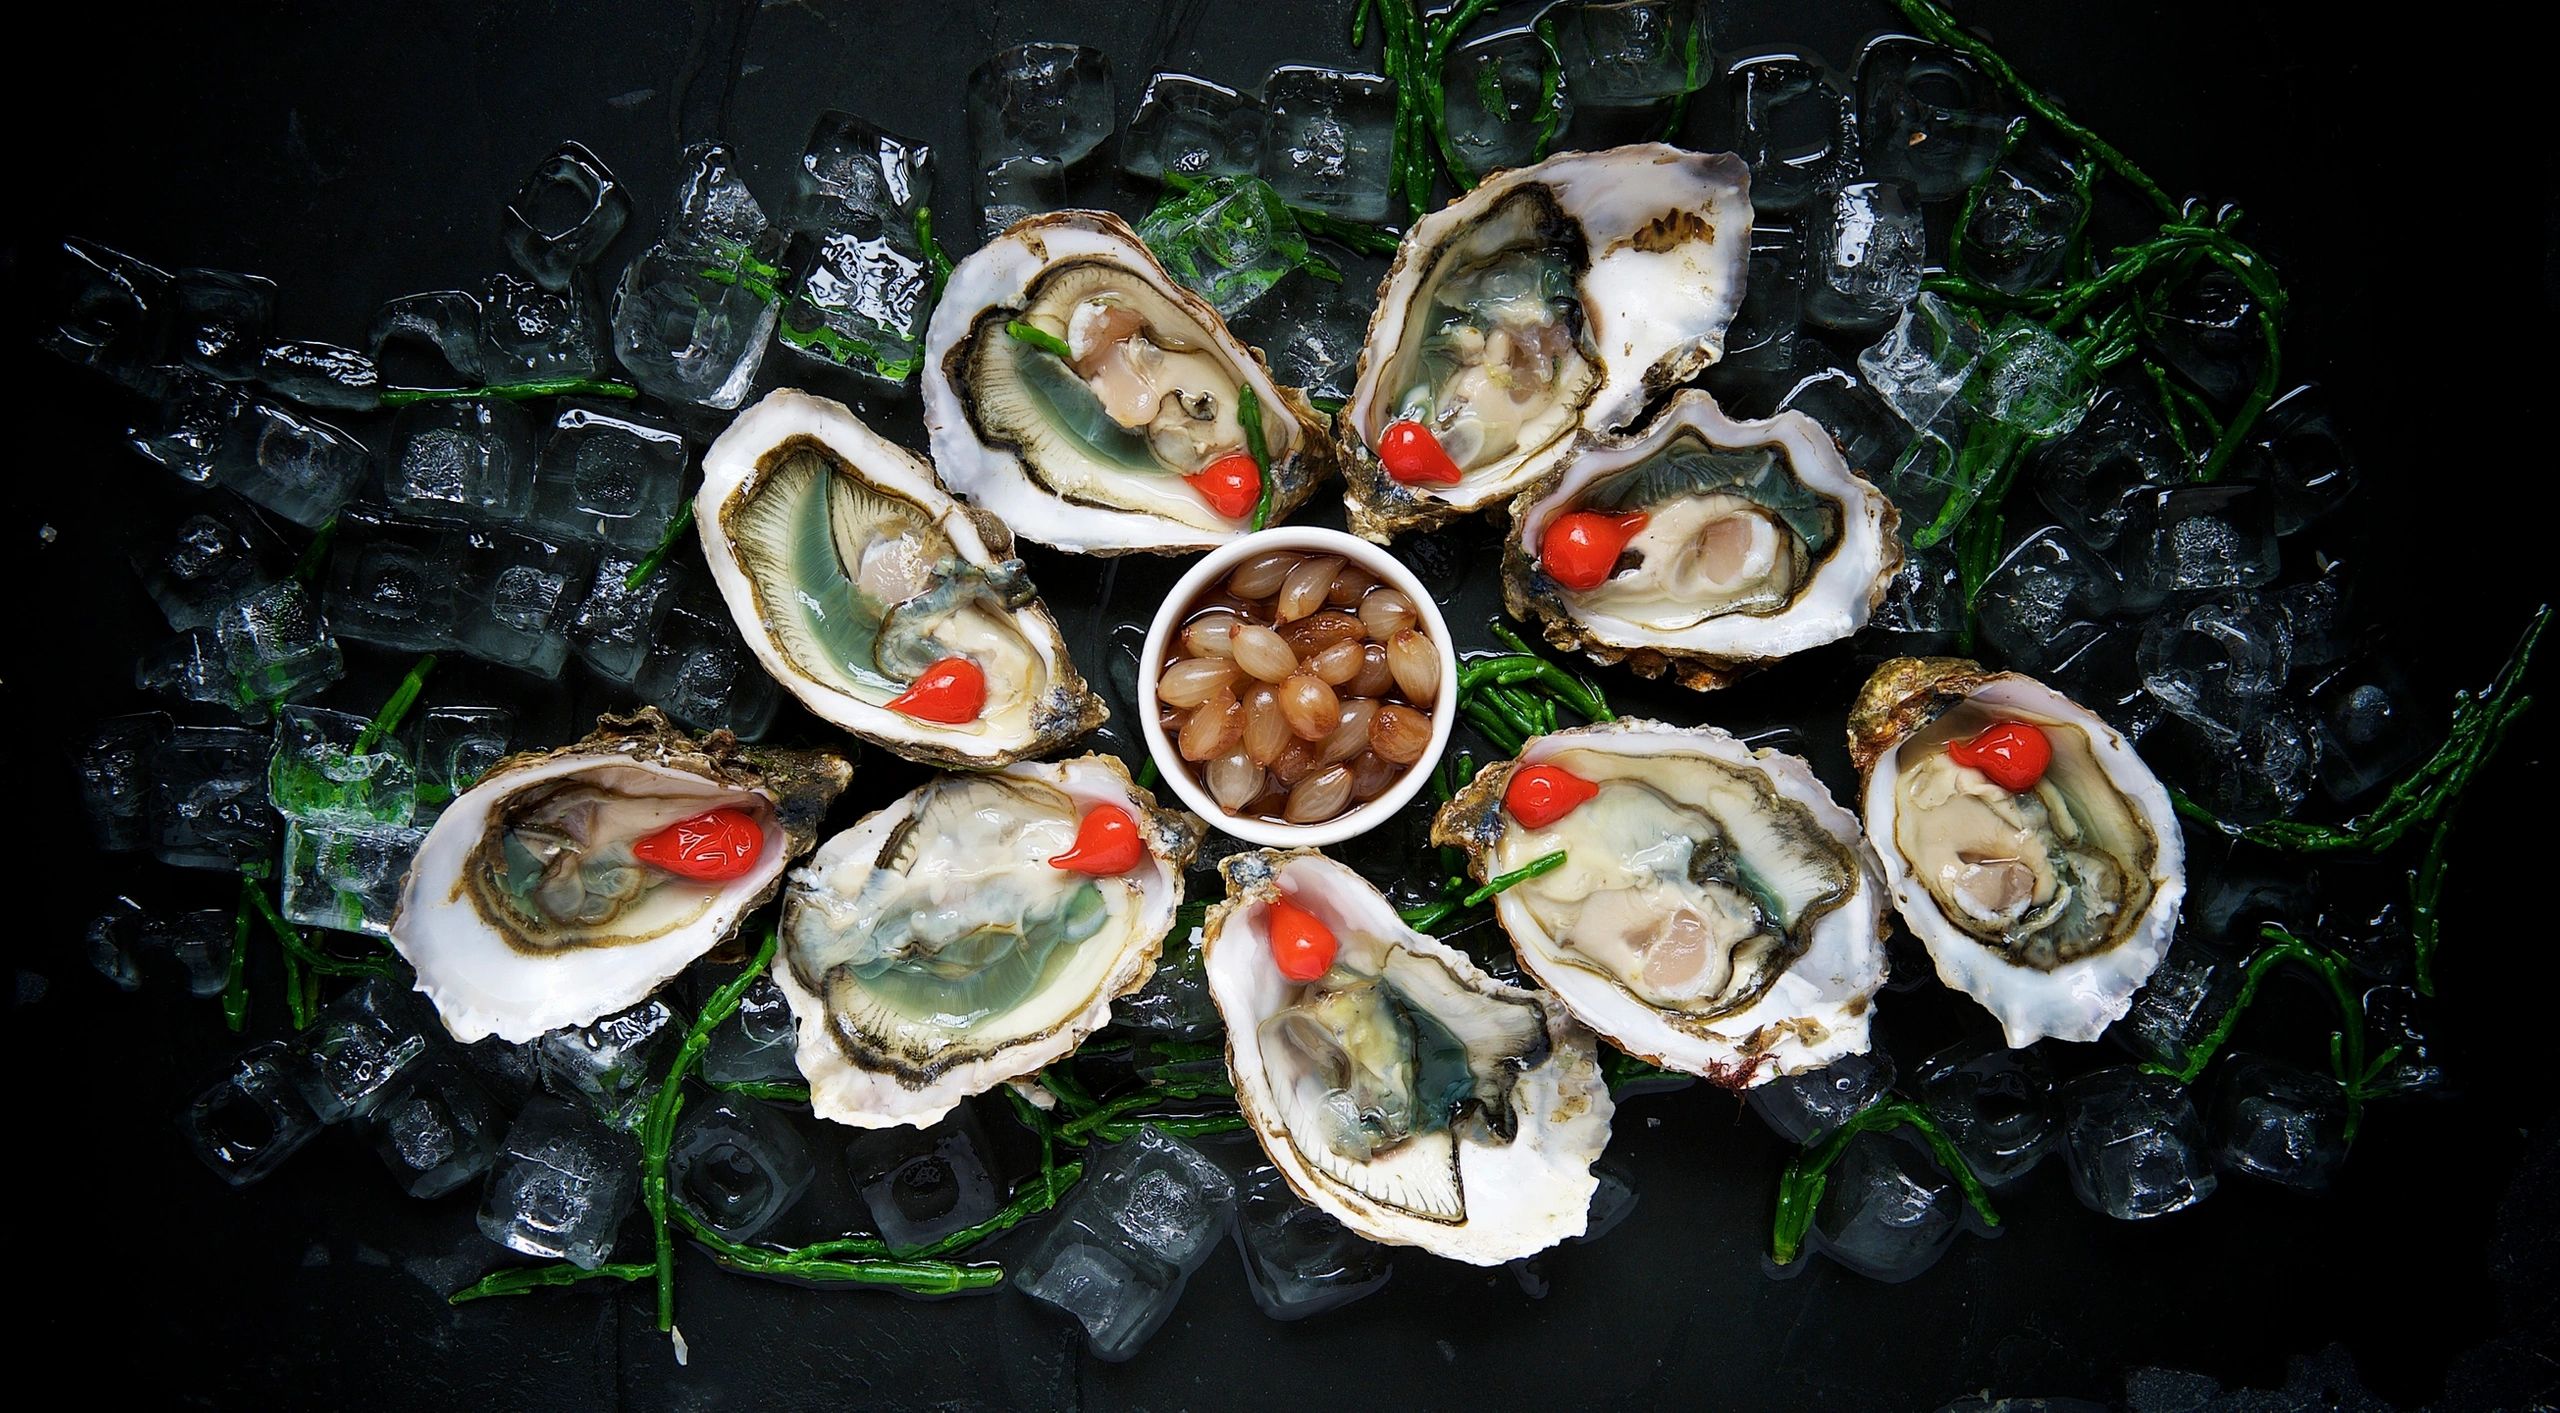 Pickering Premium Oysters - Oysters, Fresh From the Farm